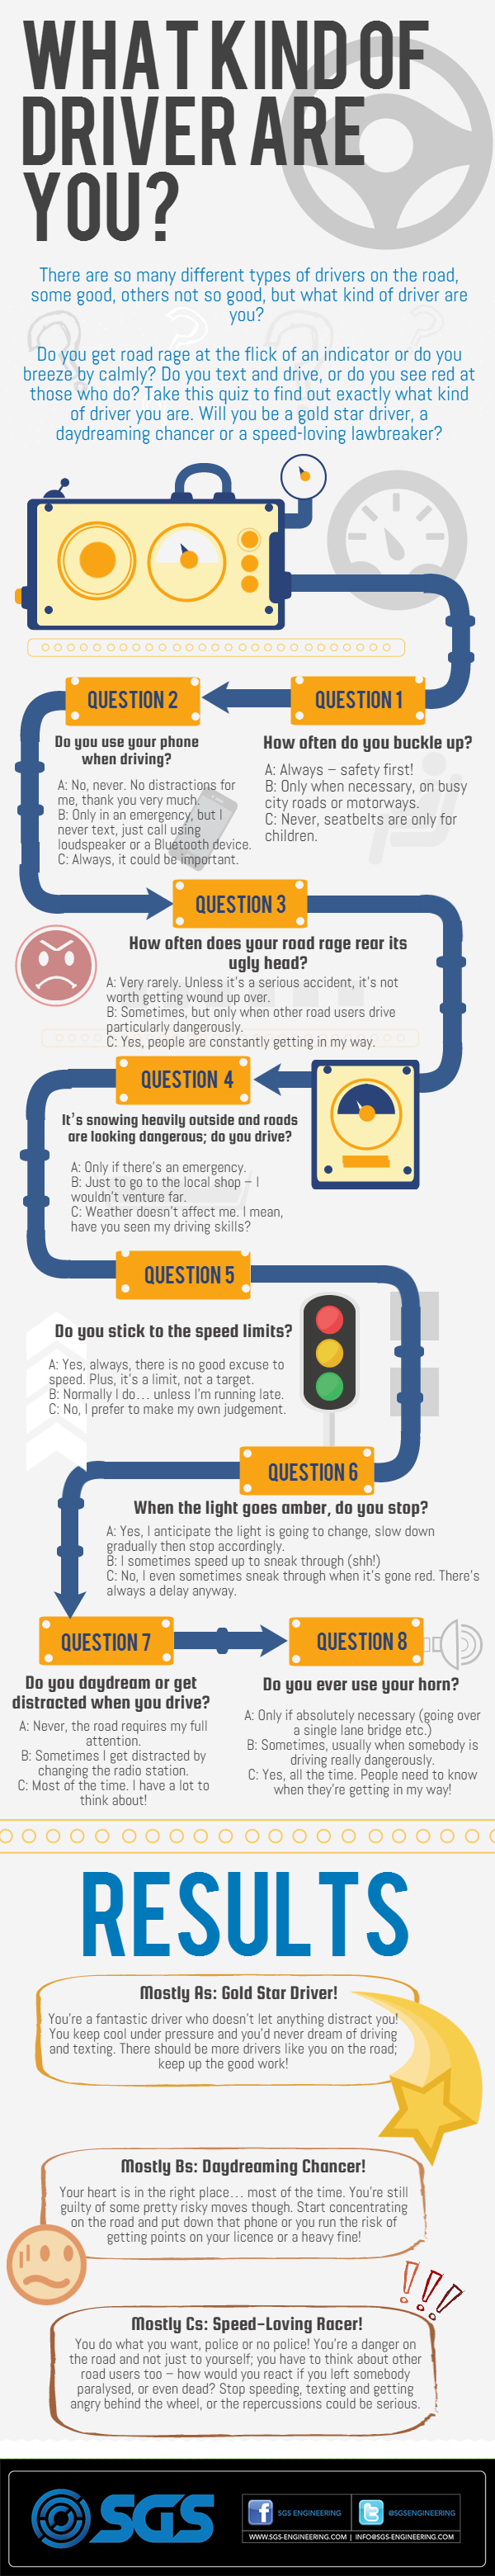 2014-09-26-What-kind-of-driver-are-you-infogram